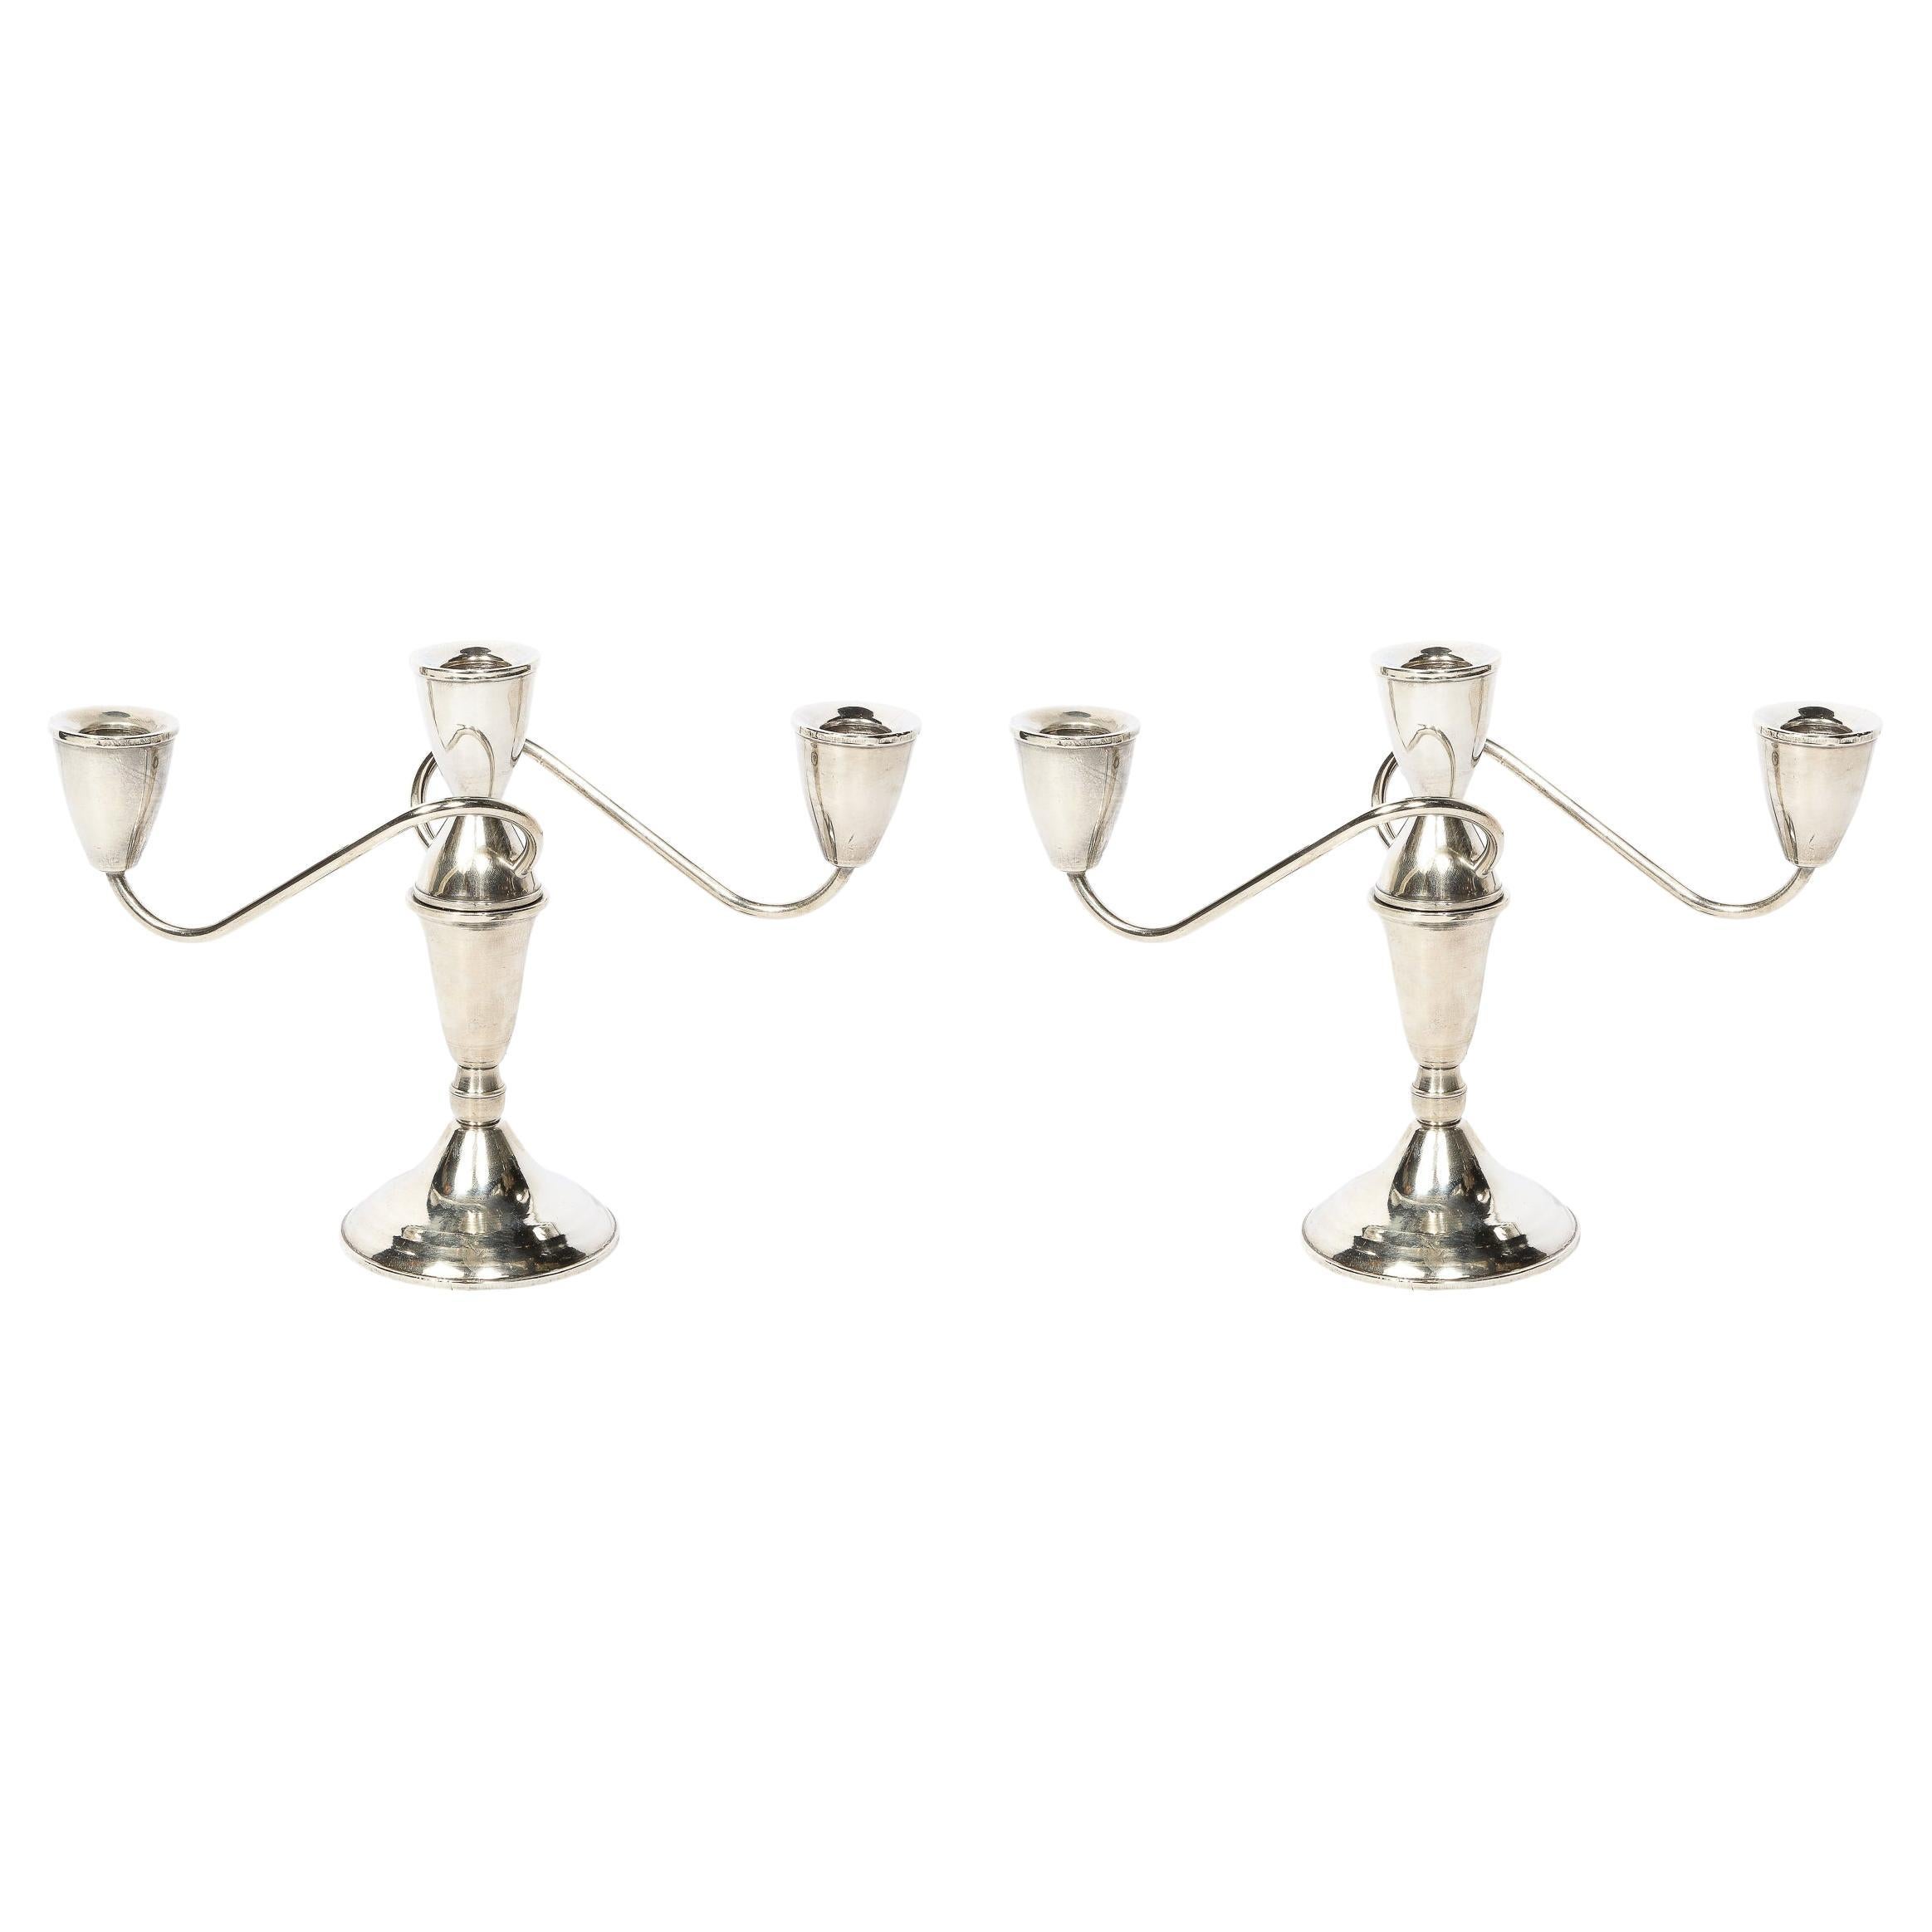 Pair of Sinuous Mid Century Sterling Candelabras by Duchin Creations